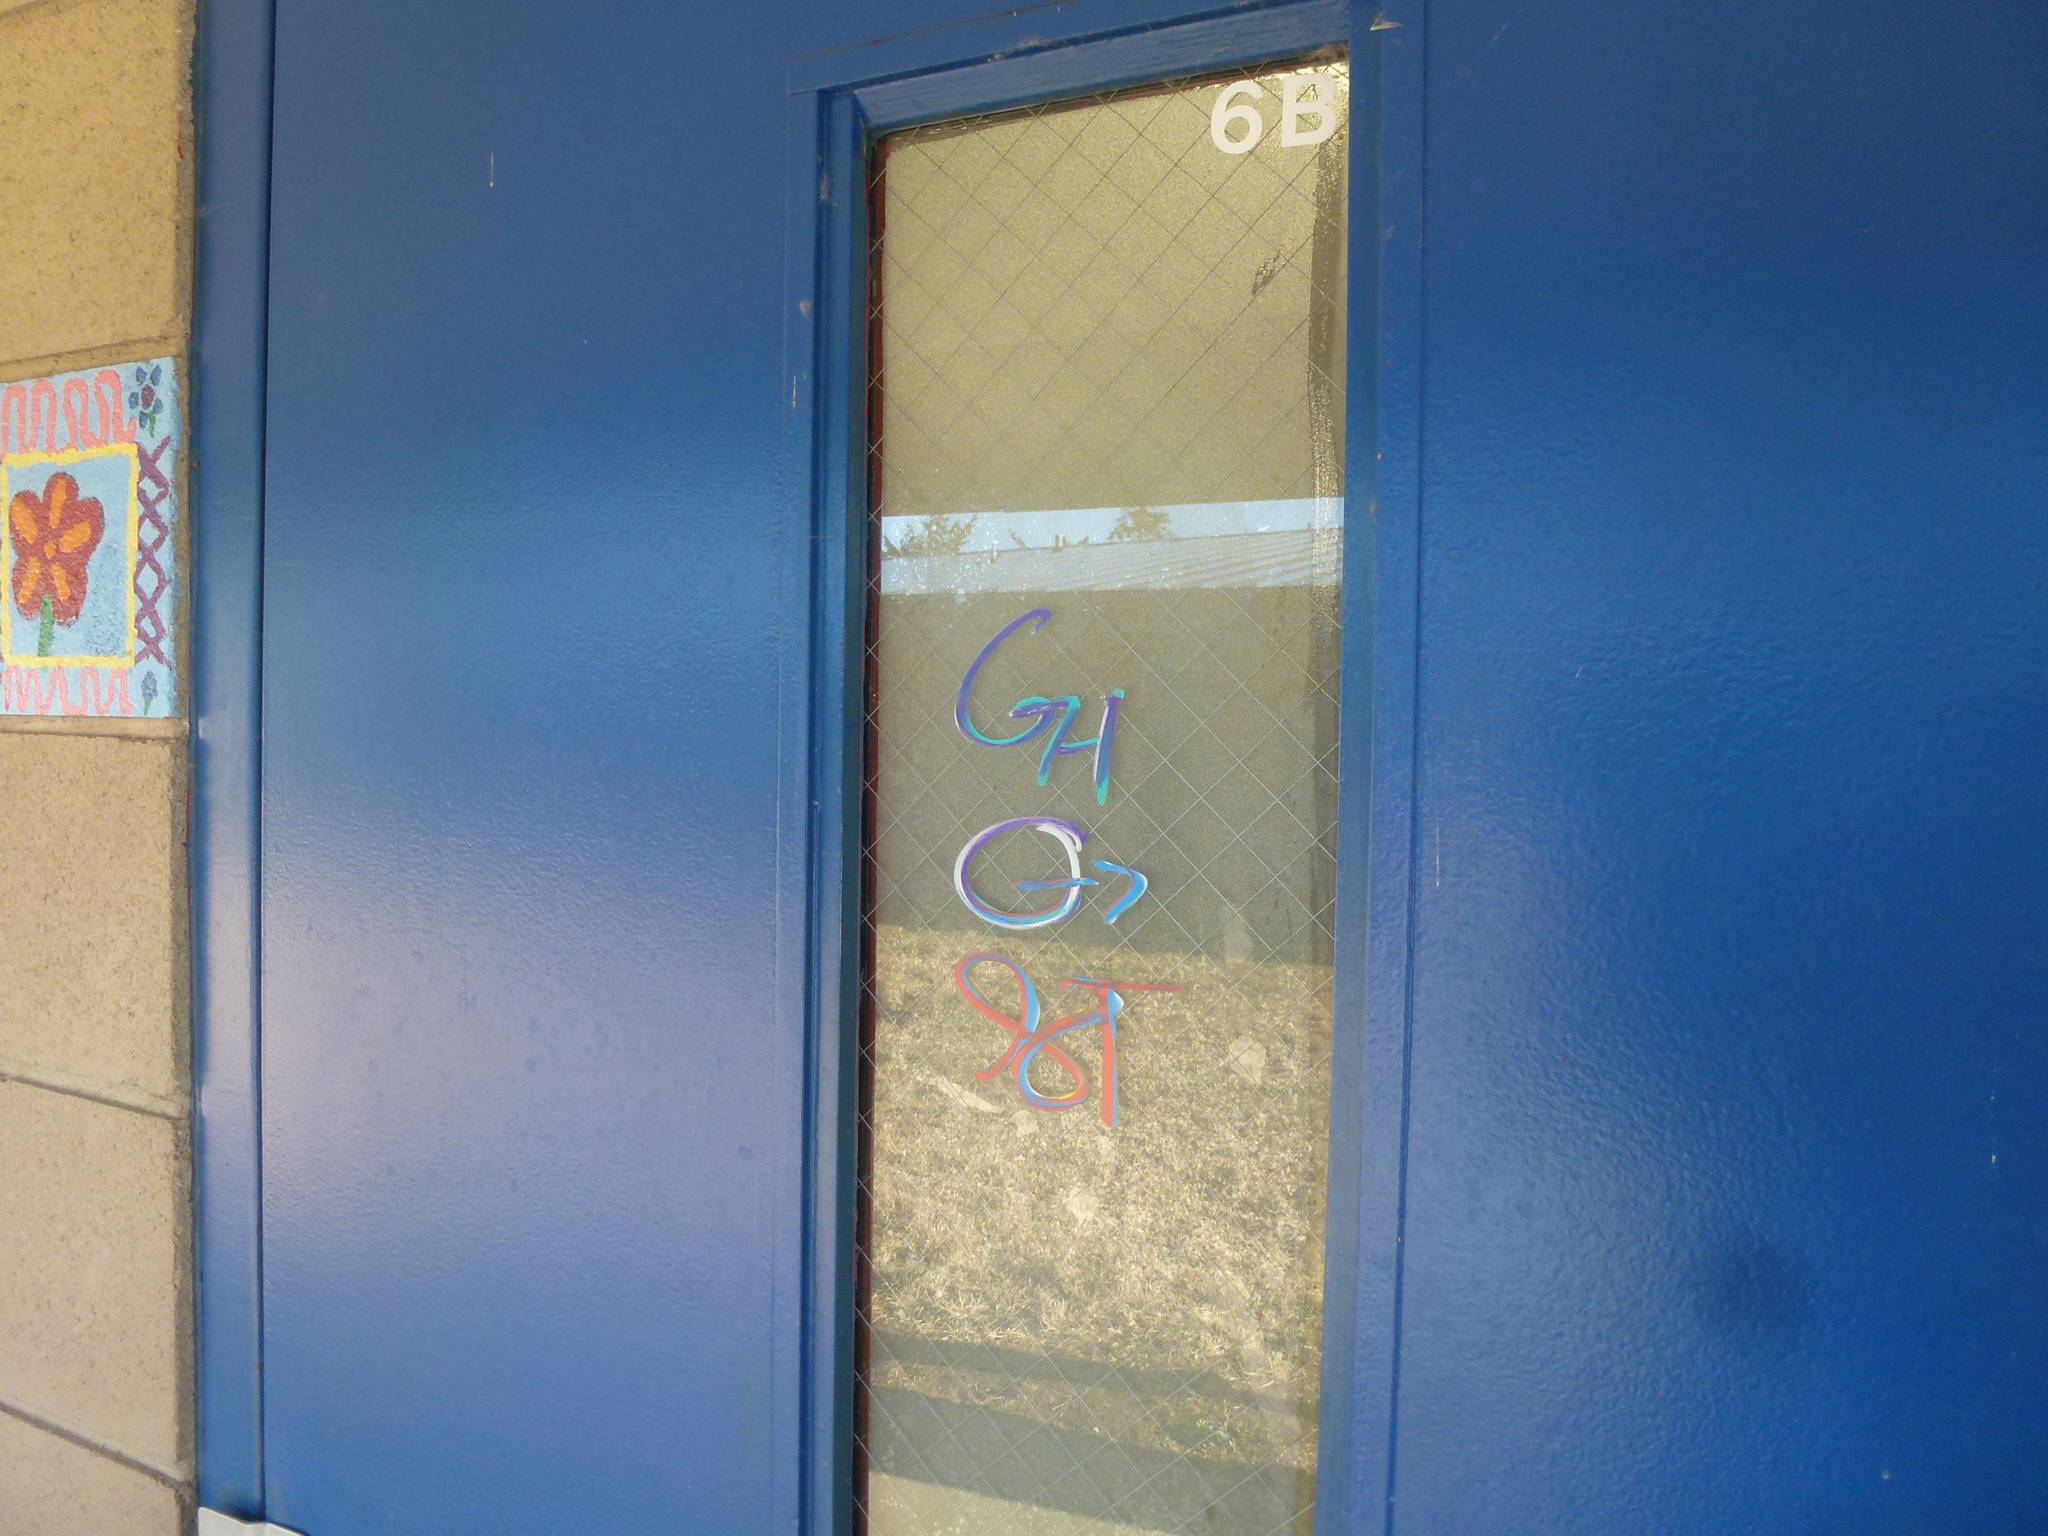 Sequim Police say after interviews, a 12-year-old admitted to vandalizing the exterior of Helen Haller Elementary and the Sequim School District’s concession stand. However, the child did not admit to vandalism inside one classroom at the school. Photo courtesy of Sequim Police Department